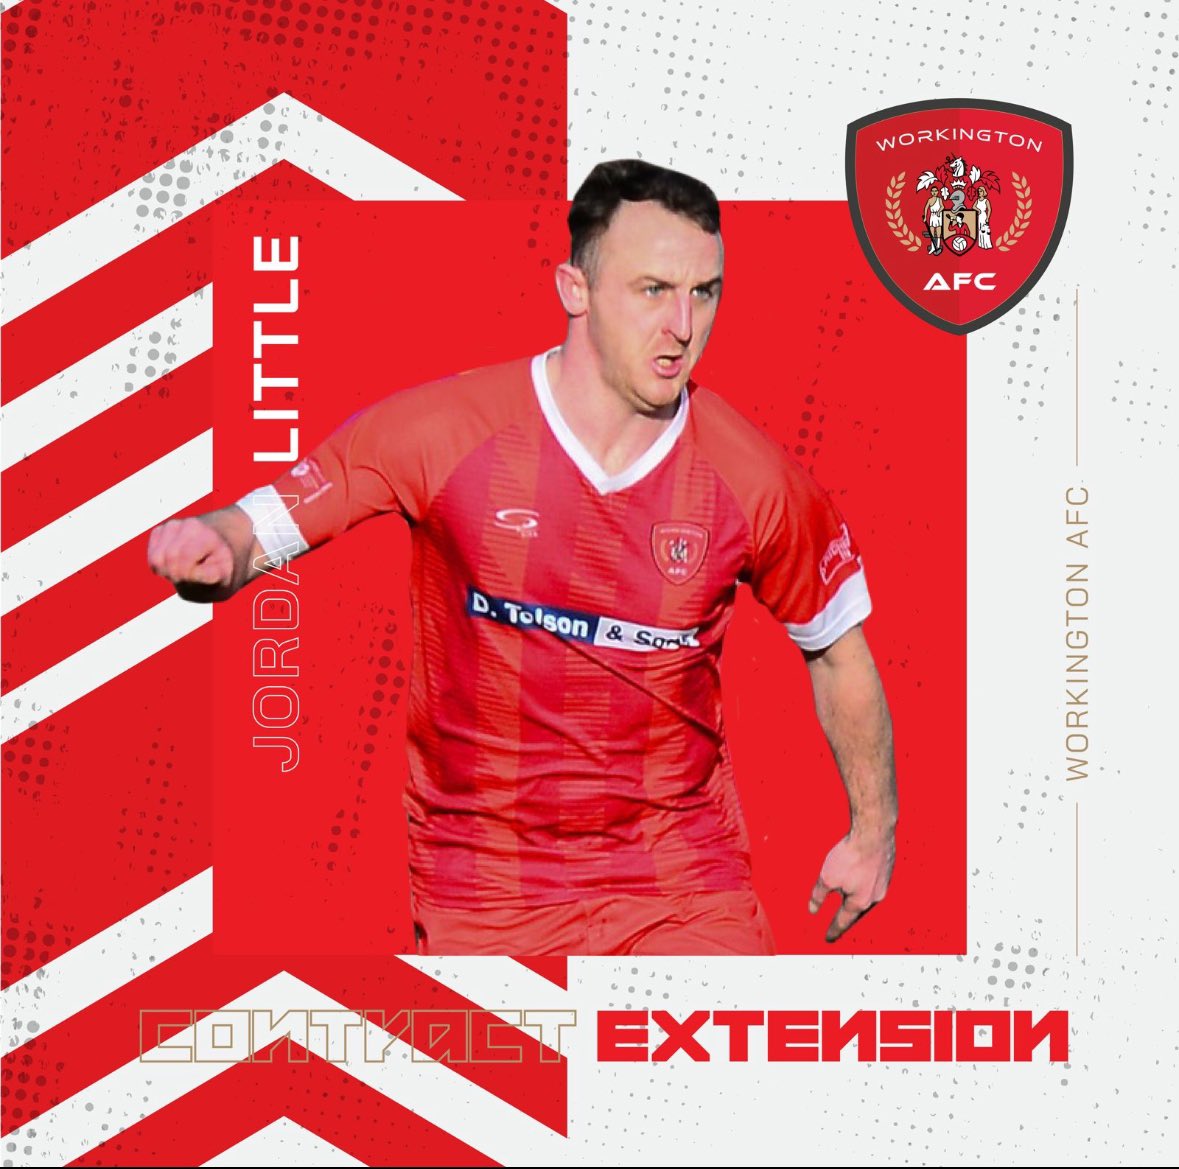 𝗗𝗲𝗳𝗲𝗻𝗱𝗲𝗿 𝗥𝗲𝘁𝘂𝗿𝗻𝘀 💪 Another retainment for you all! We’re excited to announce that local lad and stalwart defender, Jordan Little, has returned for another season with Workington AFC. 📰 shorturl.at/eYfHv #RichHistoryBrightFuture #RedsRiseAgain